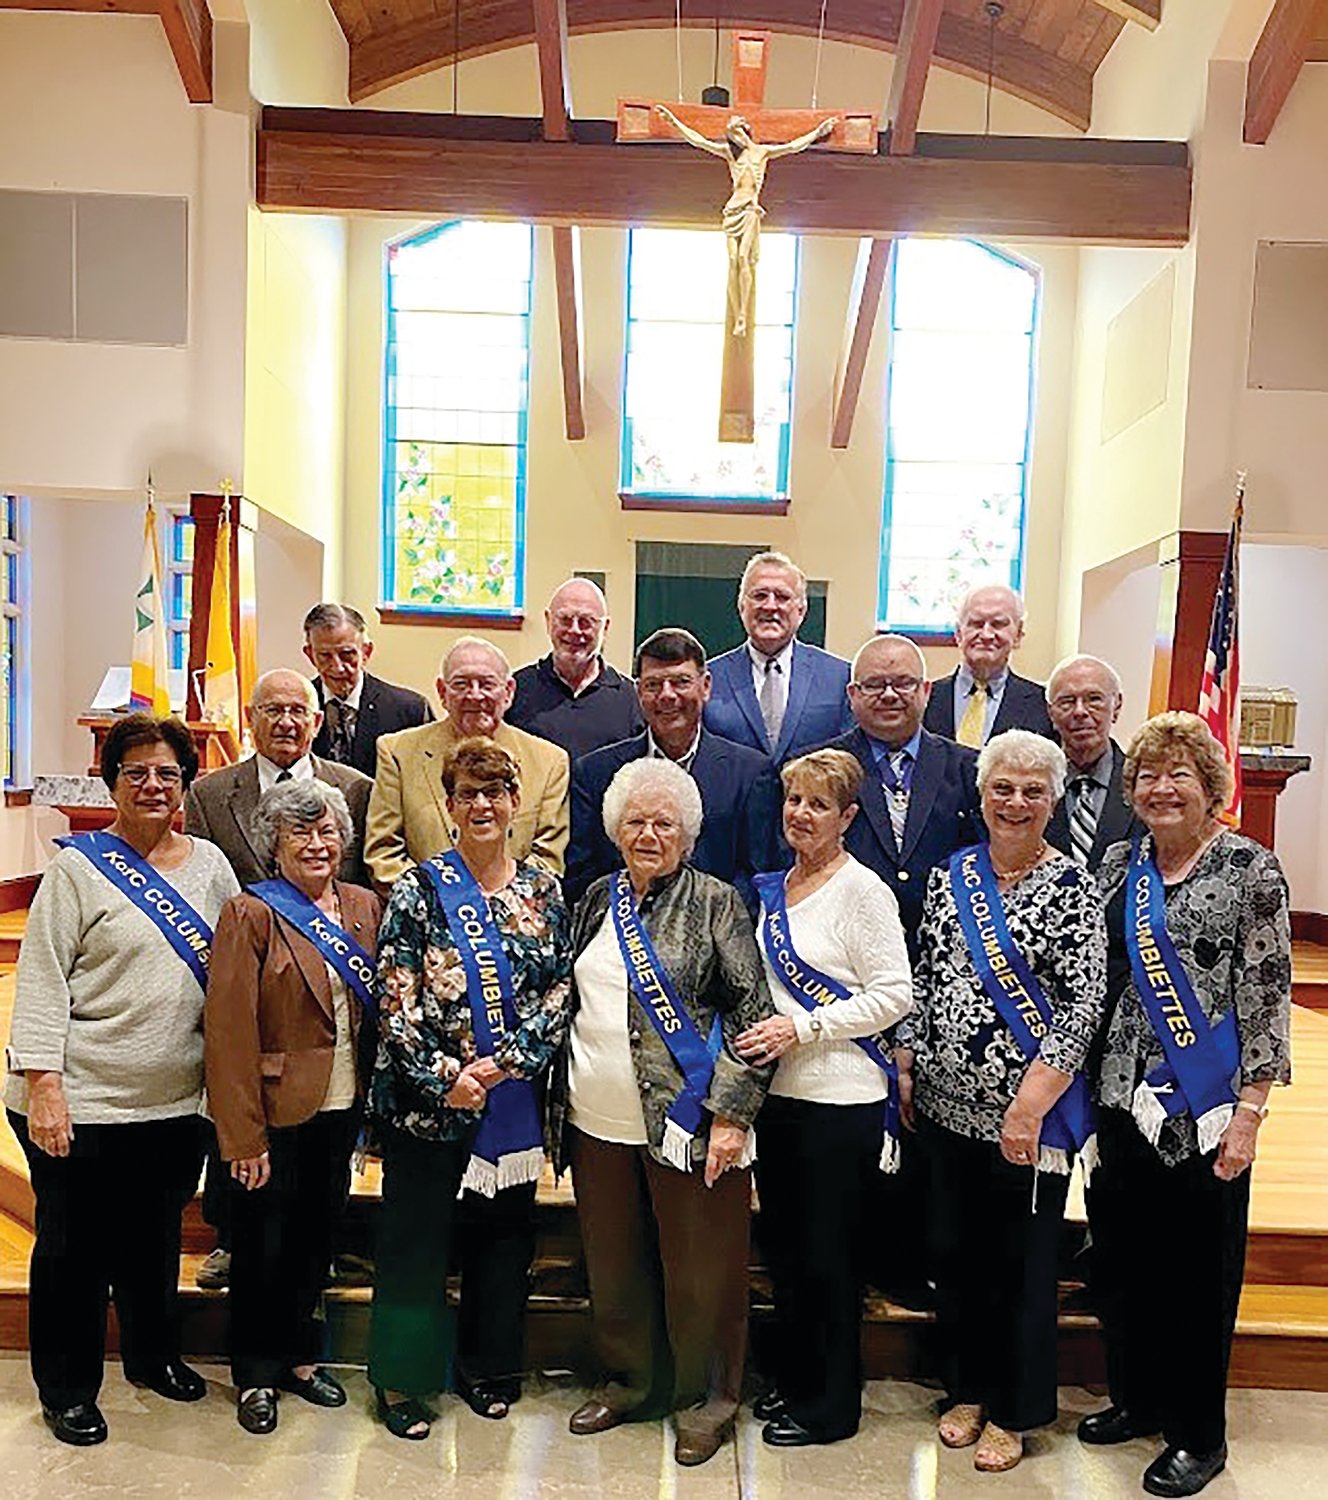 Pictured is a group of those in attendance from the Knights of Columbus and the Columbiettes. They now have a permanent home in the parish hall.